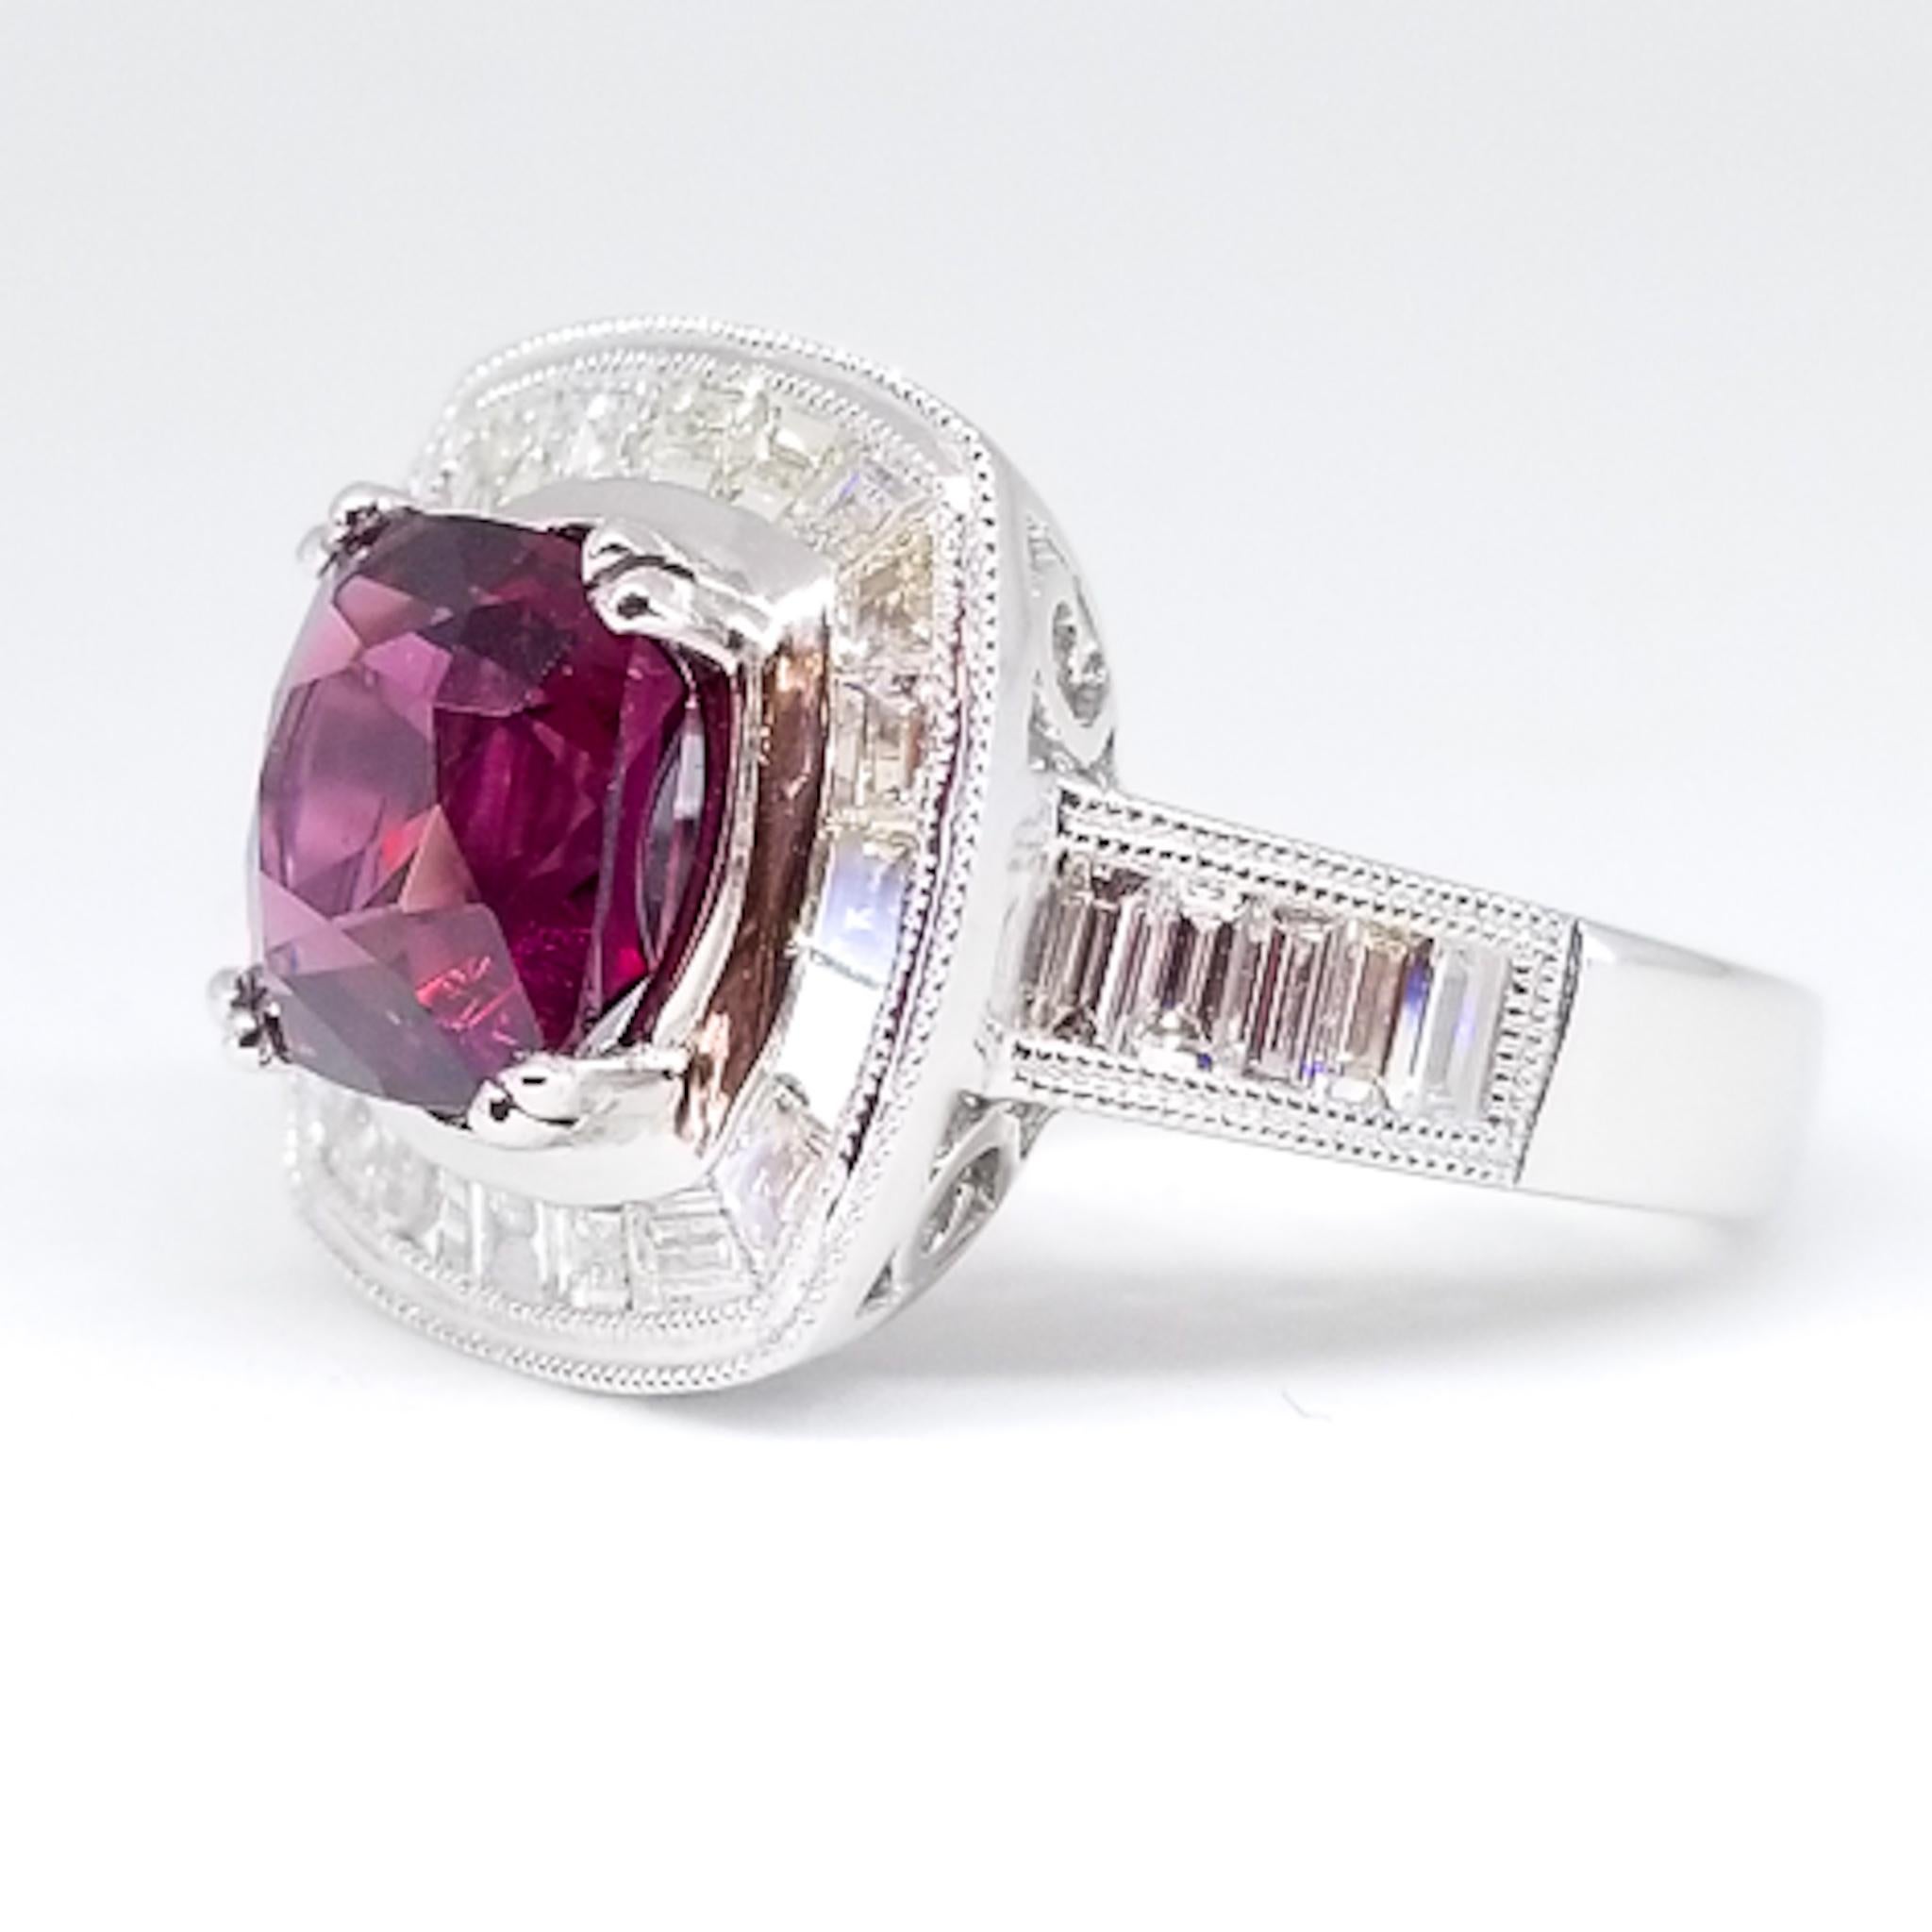 This Art Deco Inspired Right Hand or Holiday Red Engagement Ring features a GIA Certified Natural, No Treatment, AAA Quality, Purplish Red Spinel of 3.60 Carats. The Cushion, Modified Step Brilliant Cut Spinel is of Excellent Cut and Deep Purple Red